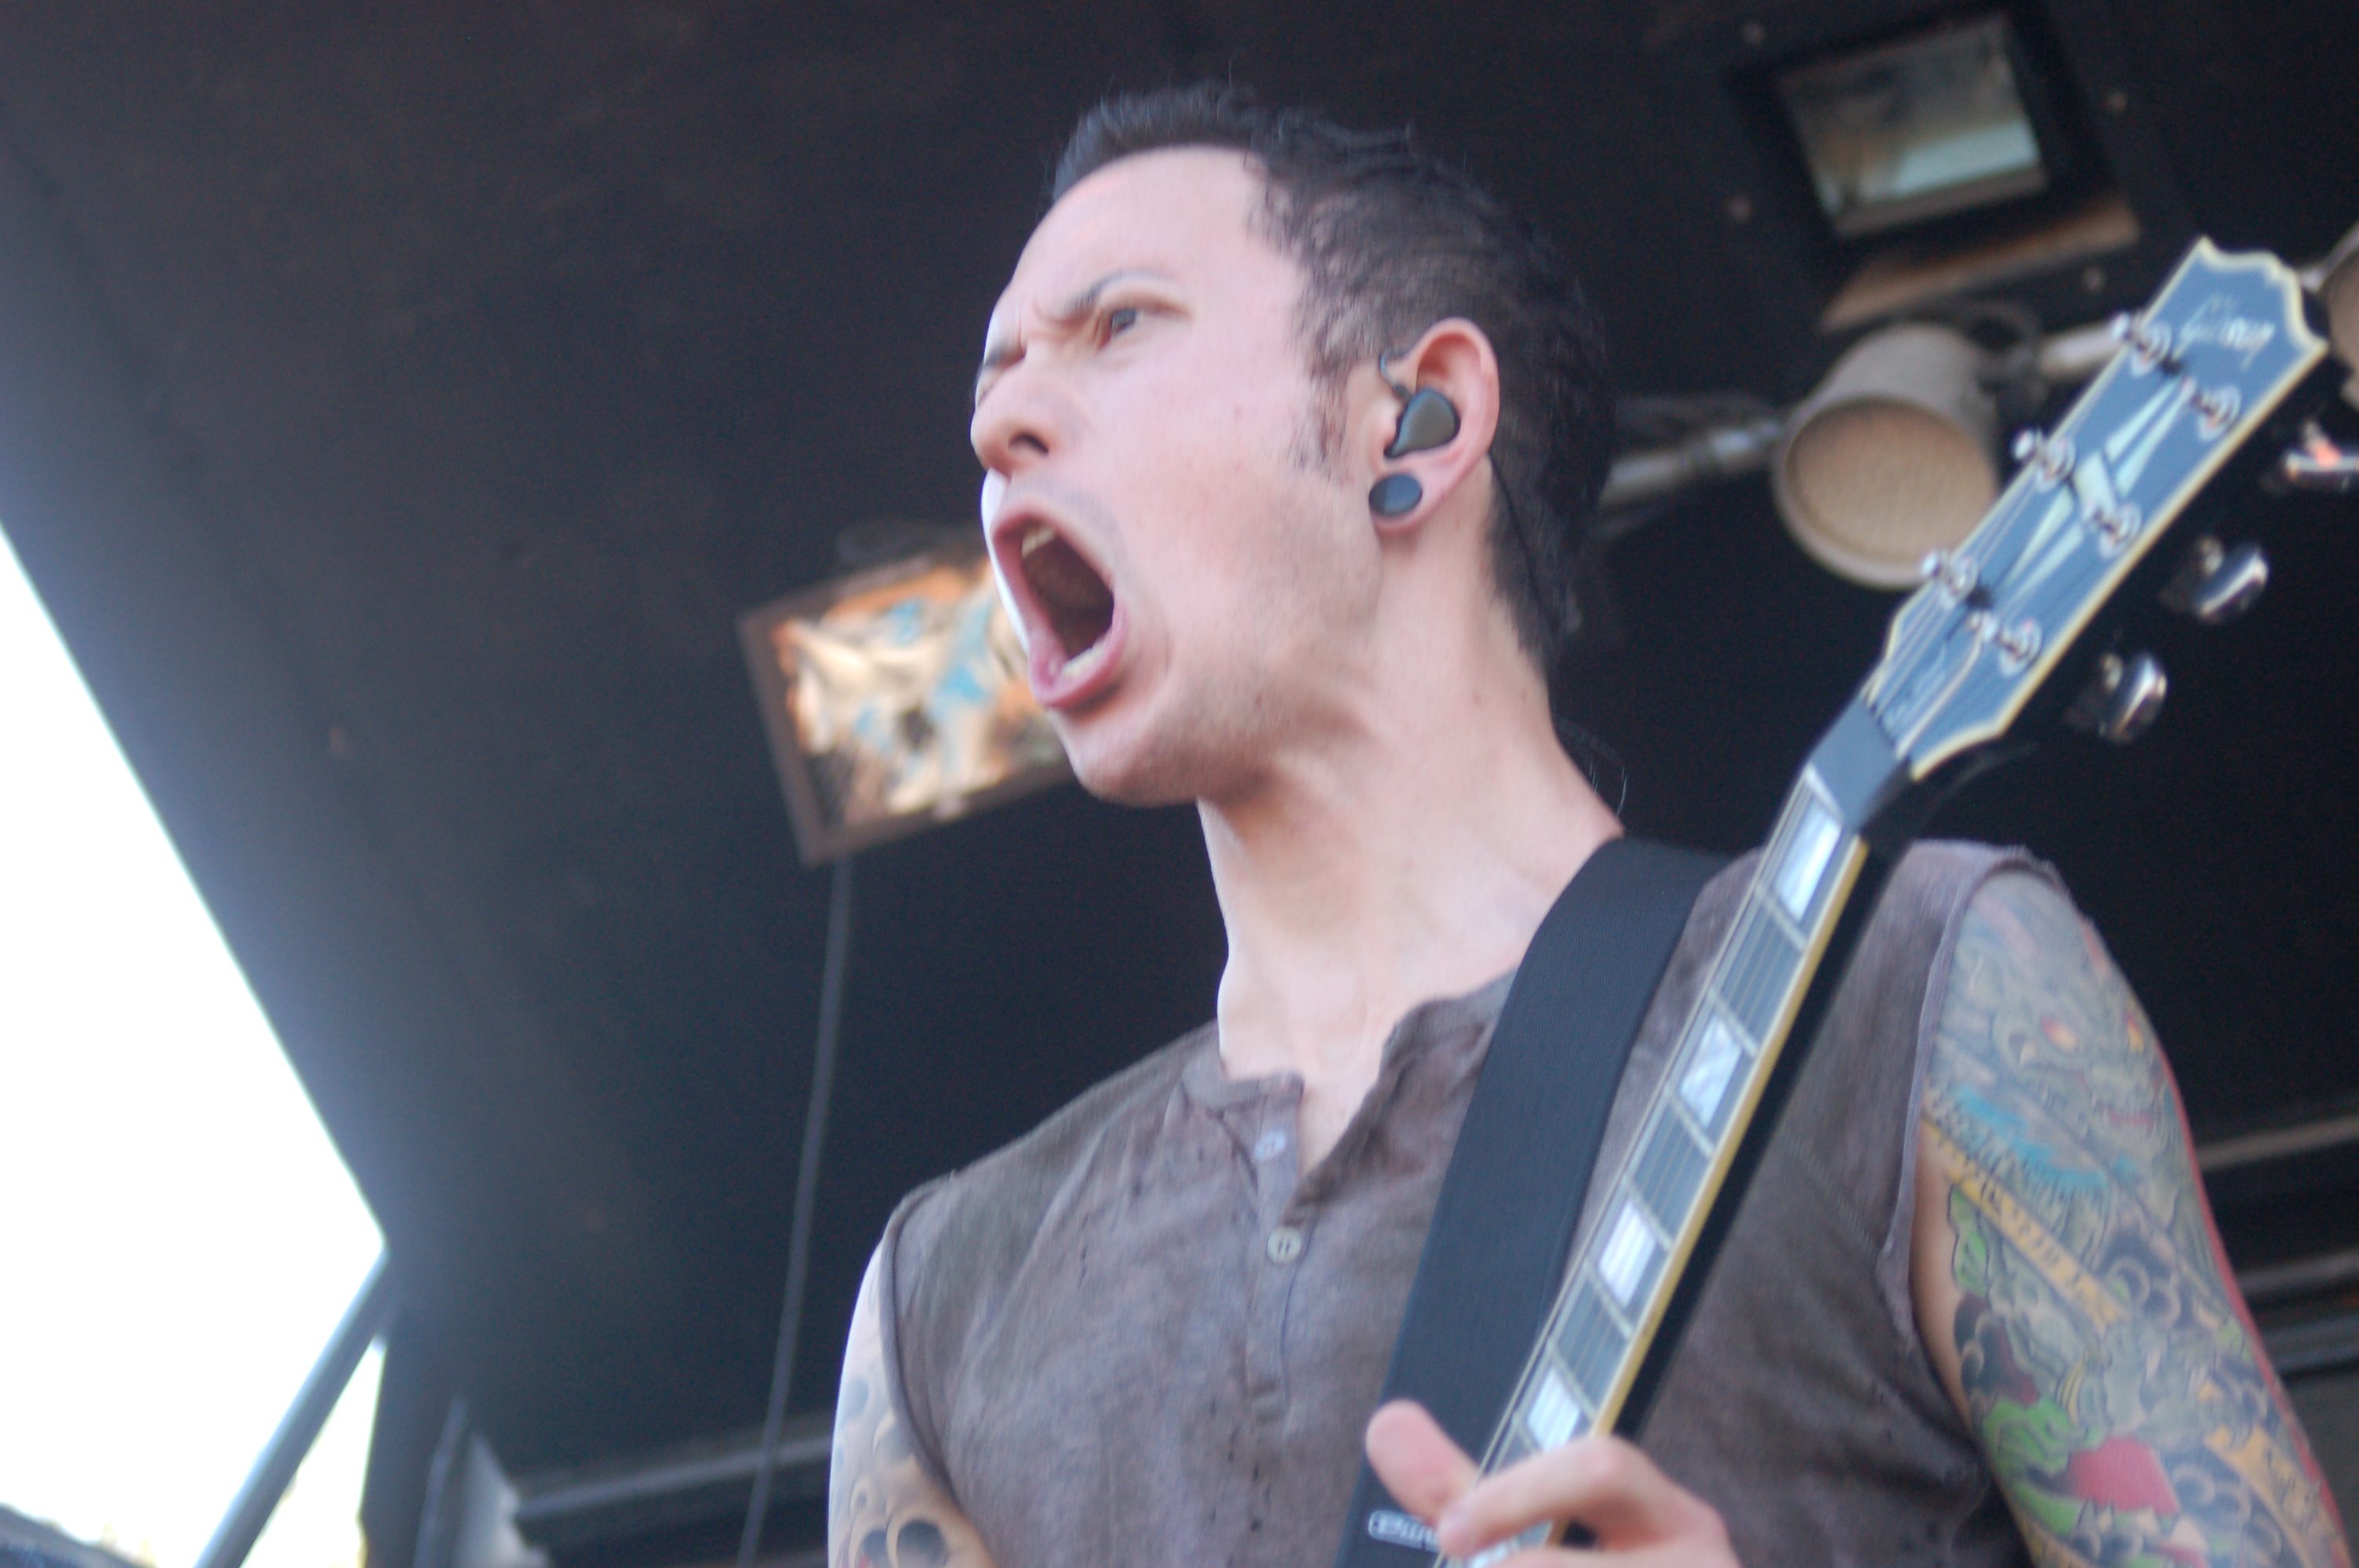 Trivium Turn Up The Heat On Their Latest Single "Drowning in the Sound"